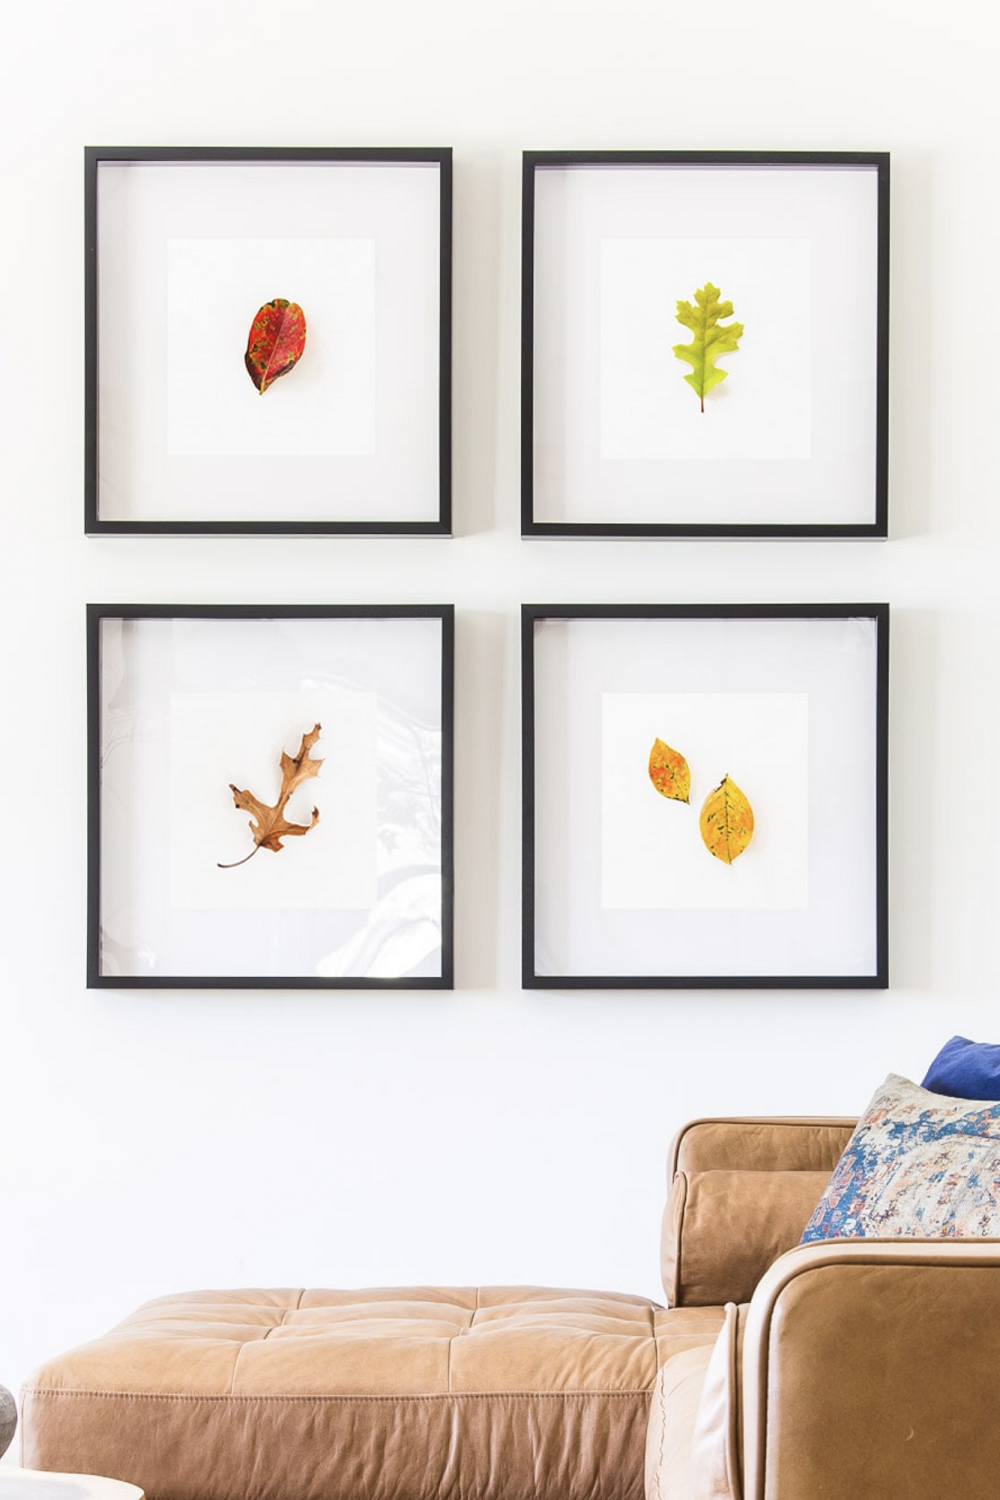 50 Beautiful Autumn Free Printables to Decorate Your Home on a Dime